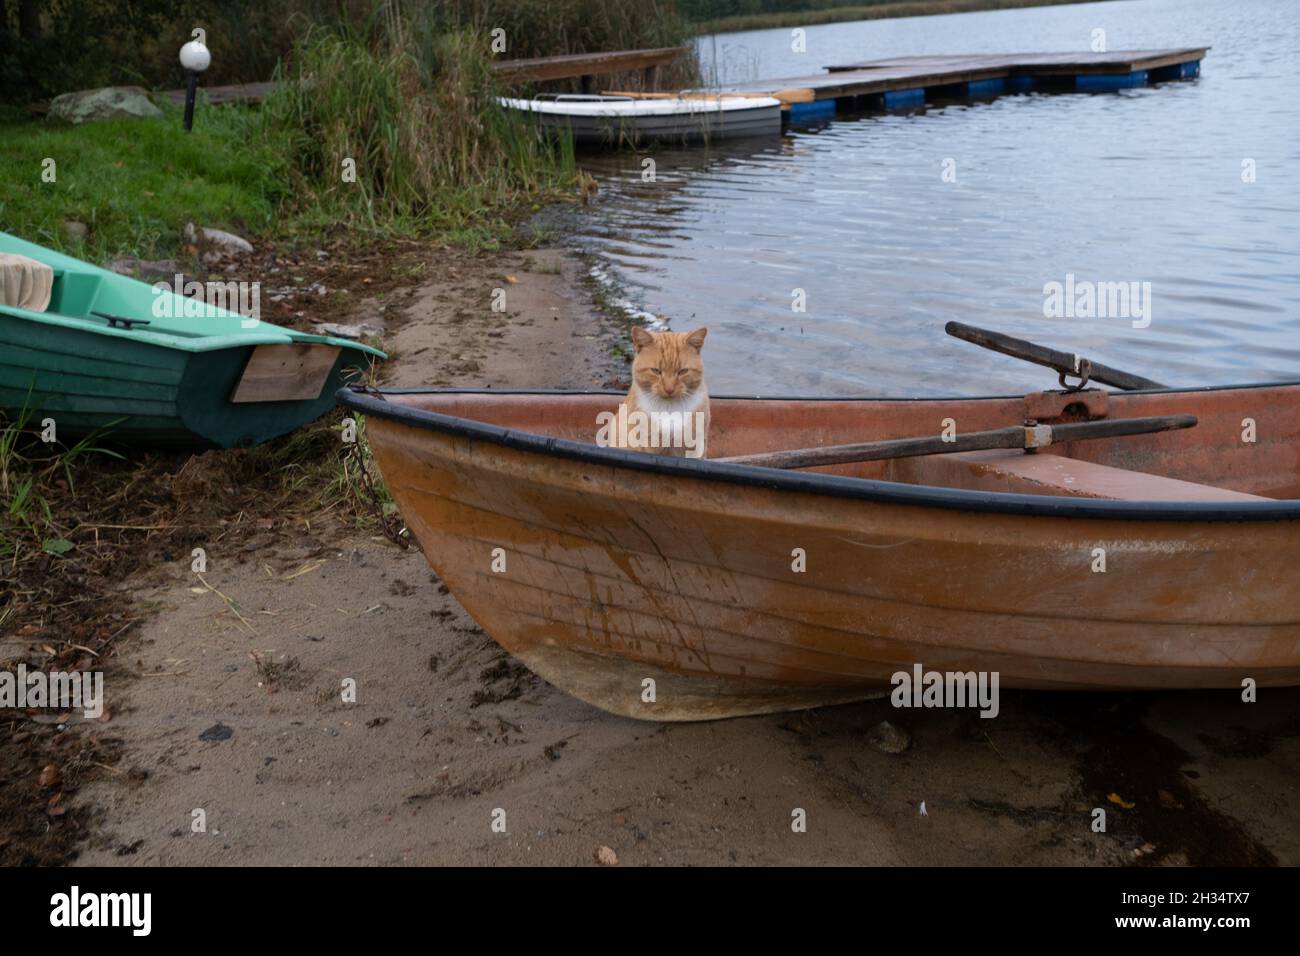 Wojnowo, Poland - 10 October 2020: ginger cat and a boat by the lake Stock Photo